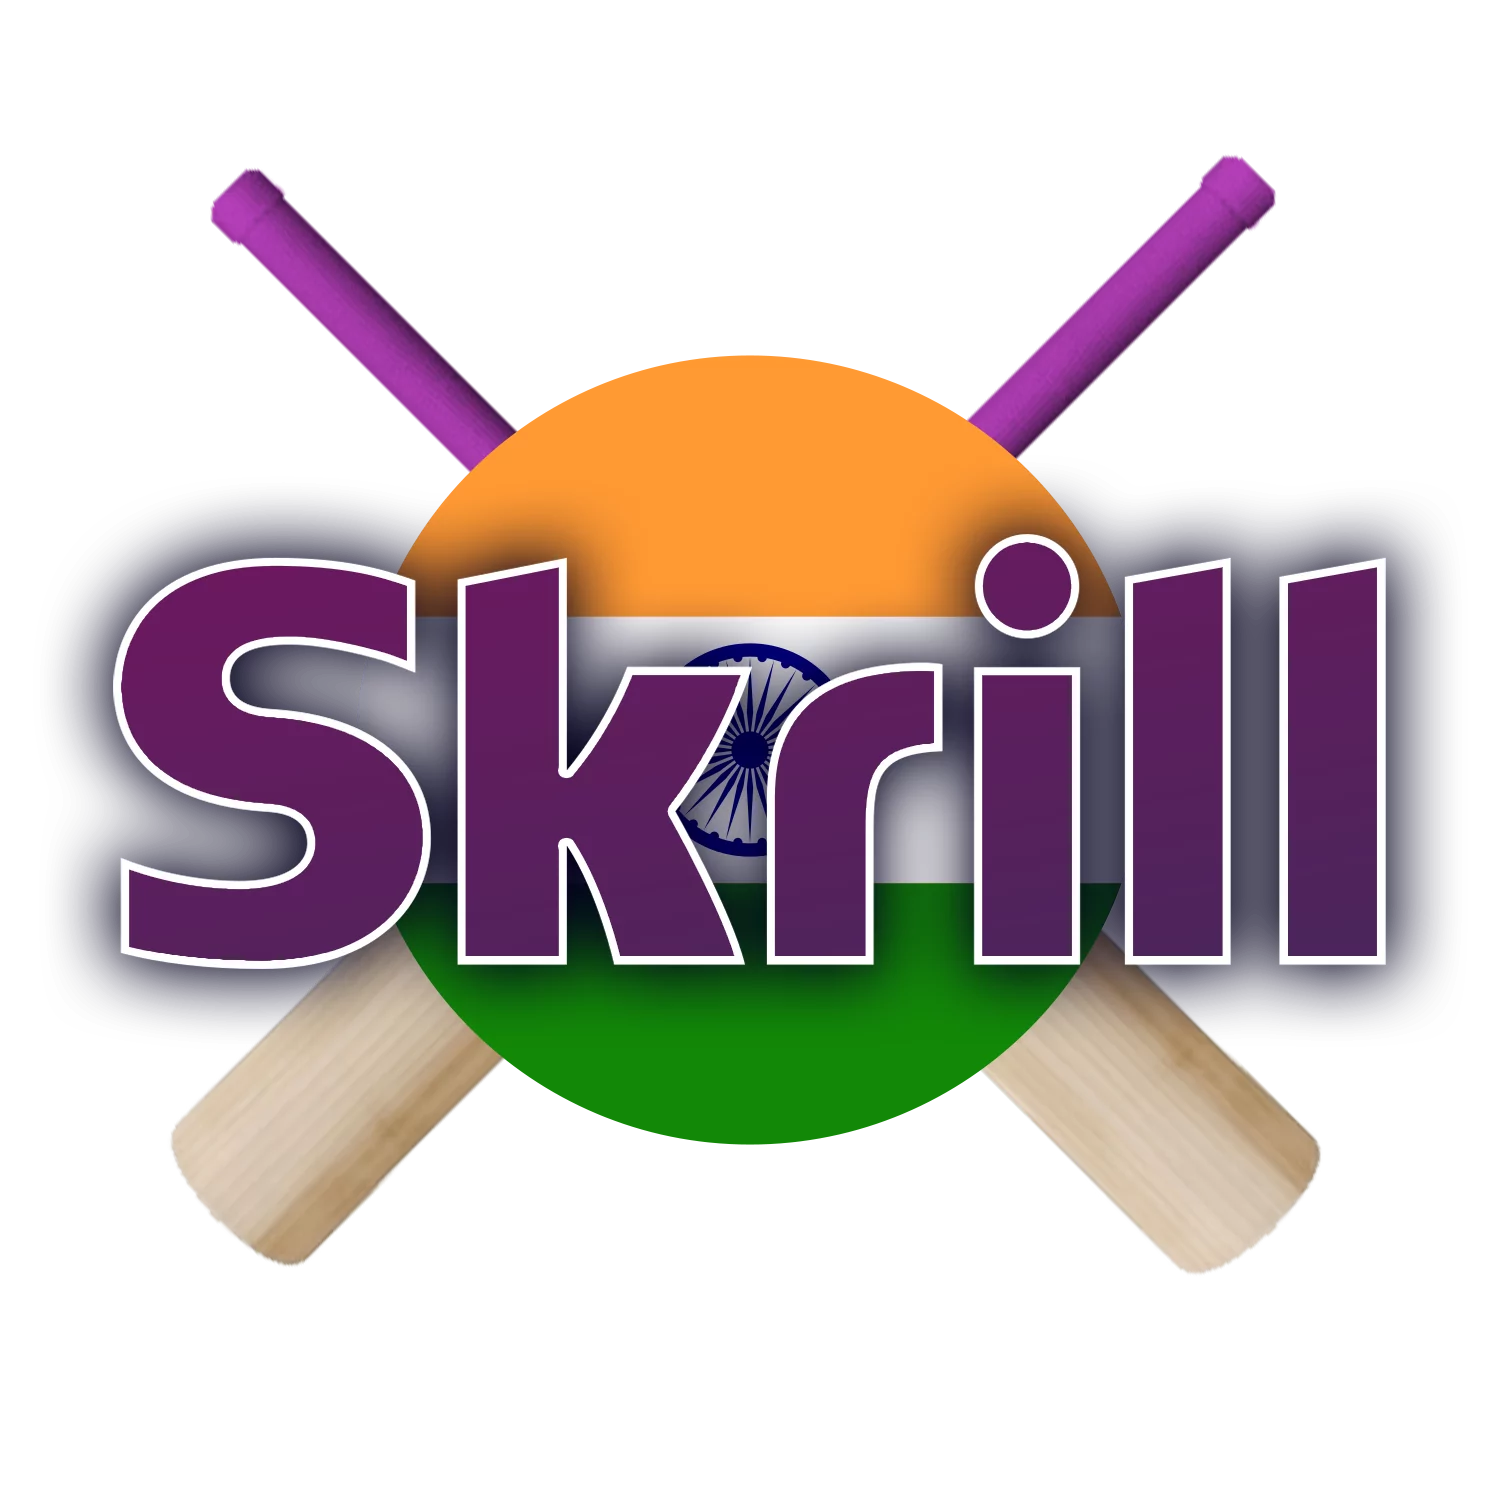 Skrill is one of the mosit popular and spread deposit methods.